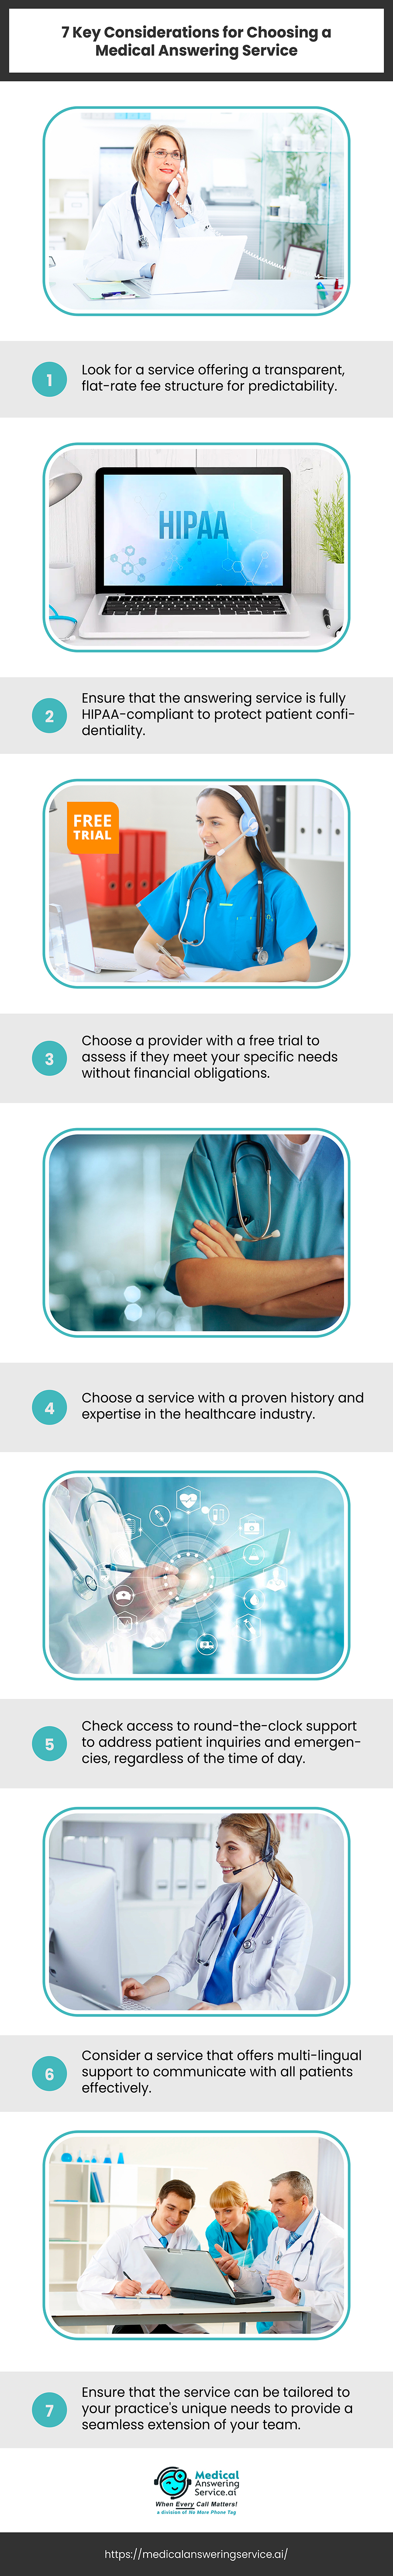 Considerations for Choosing a Medical Answering Service